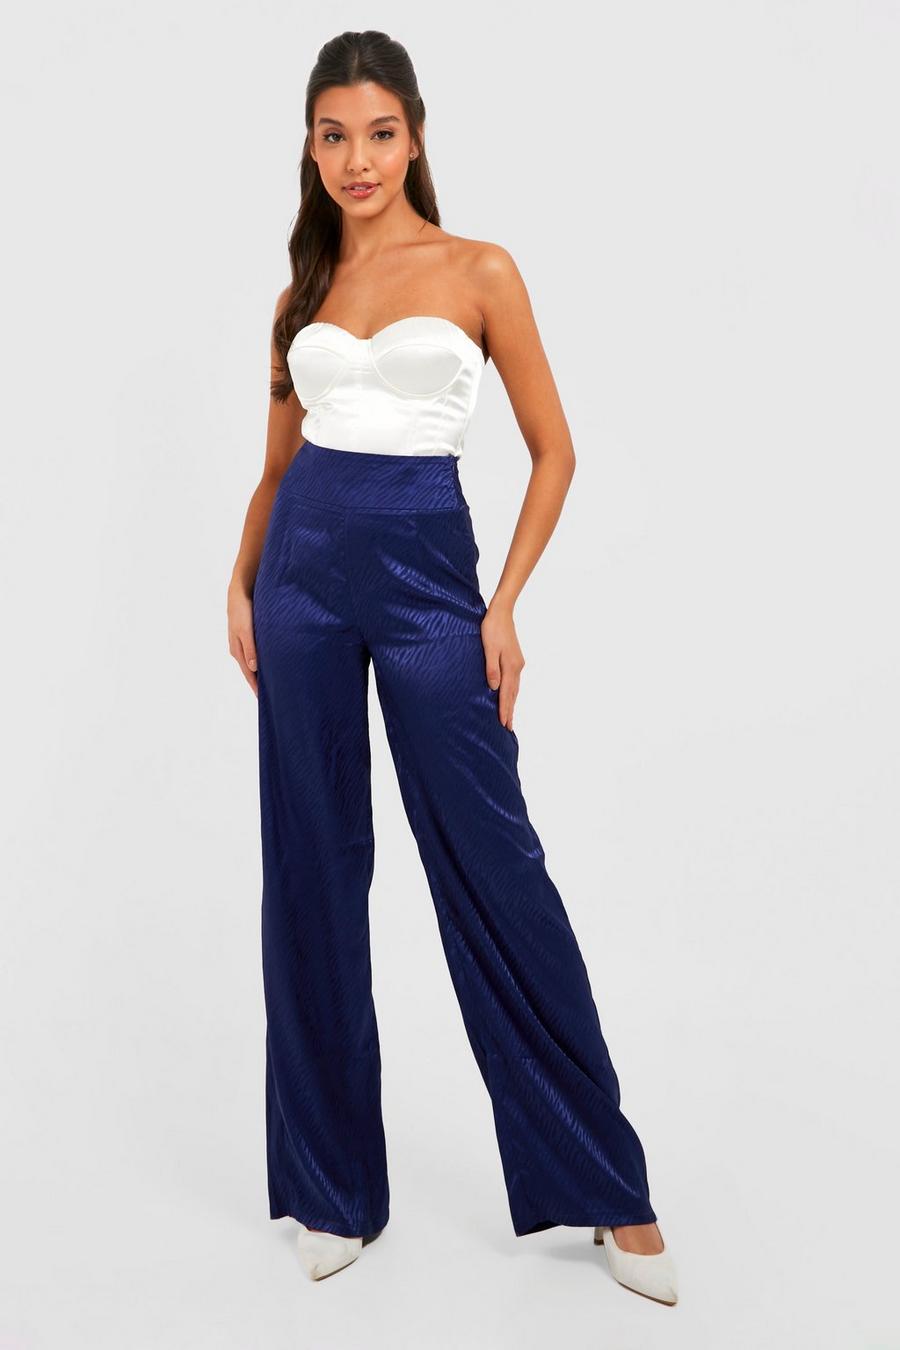 Navy Jacquard Satin High Waisted Wide Leg Trousers